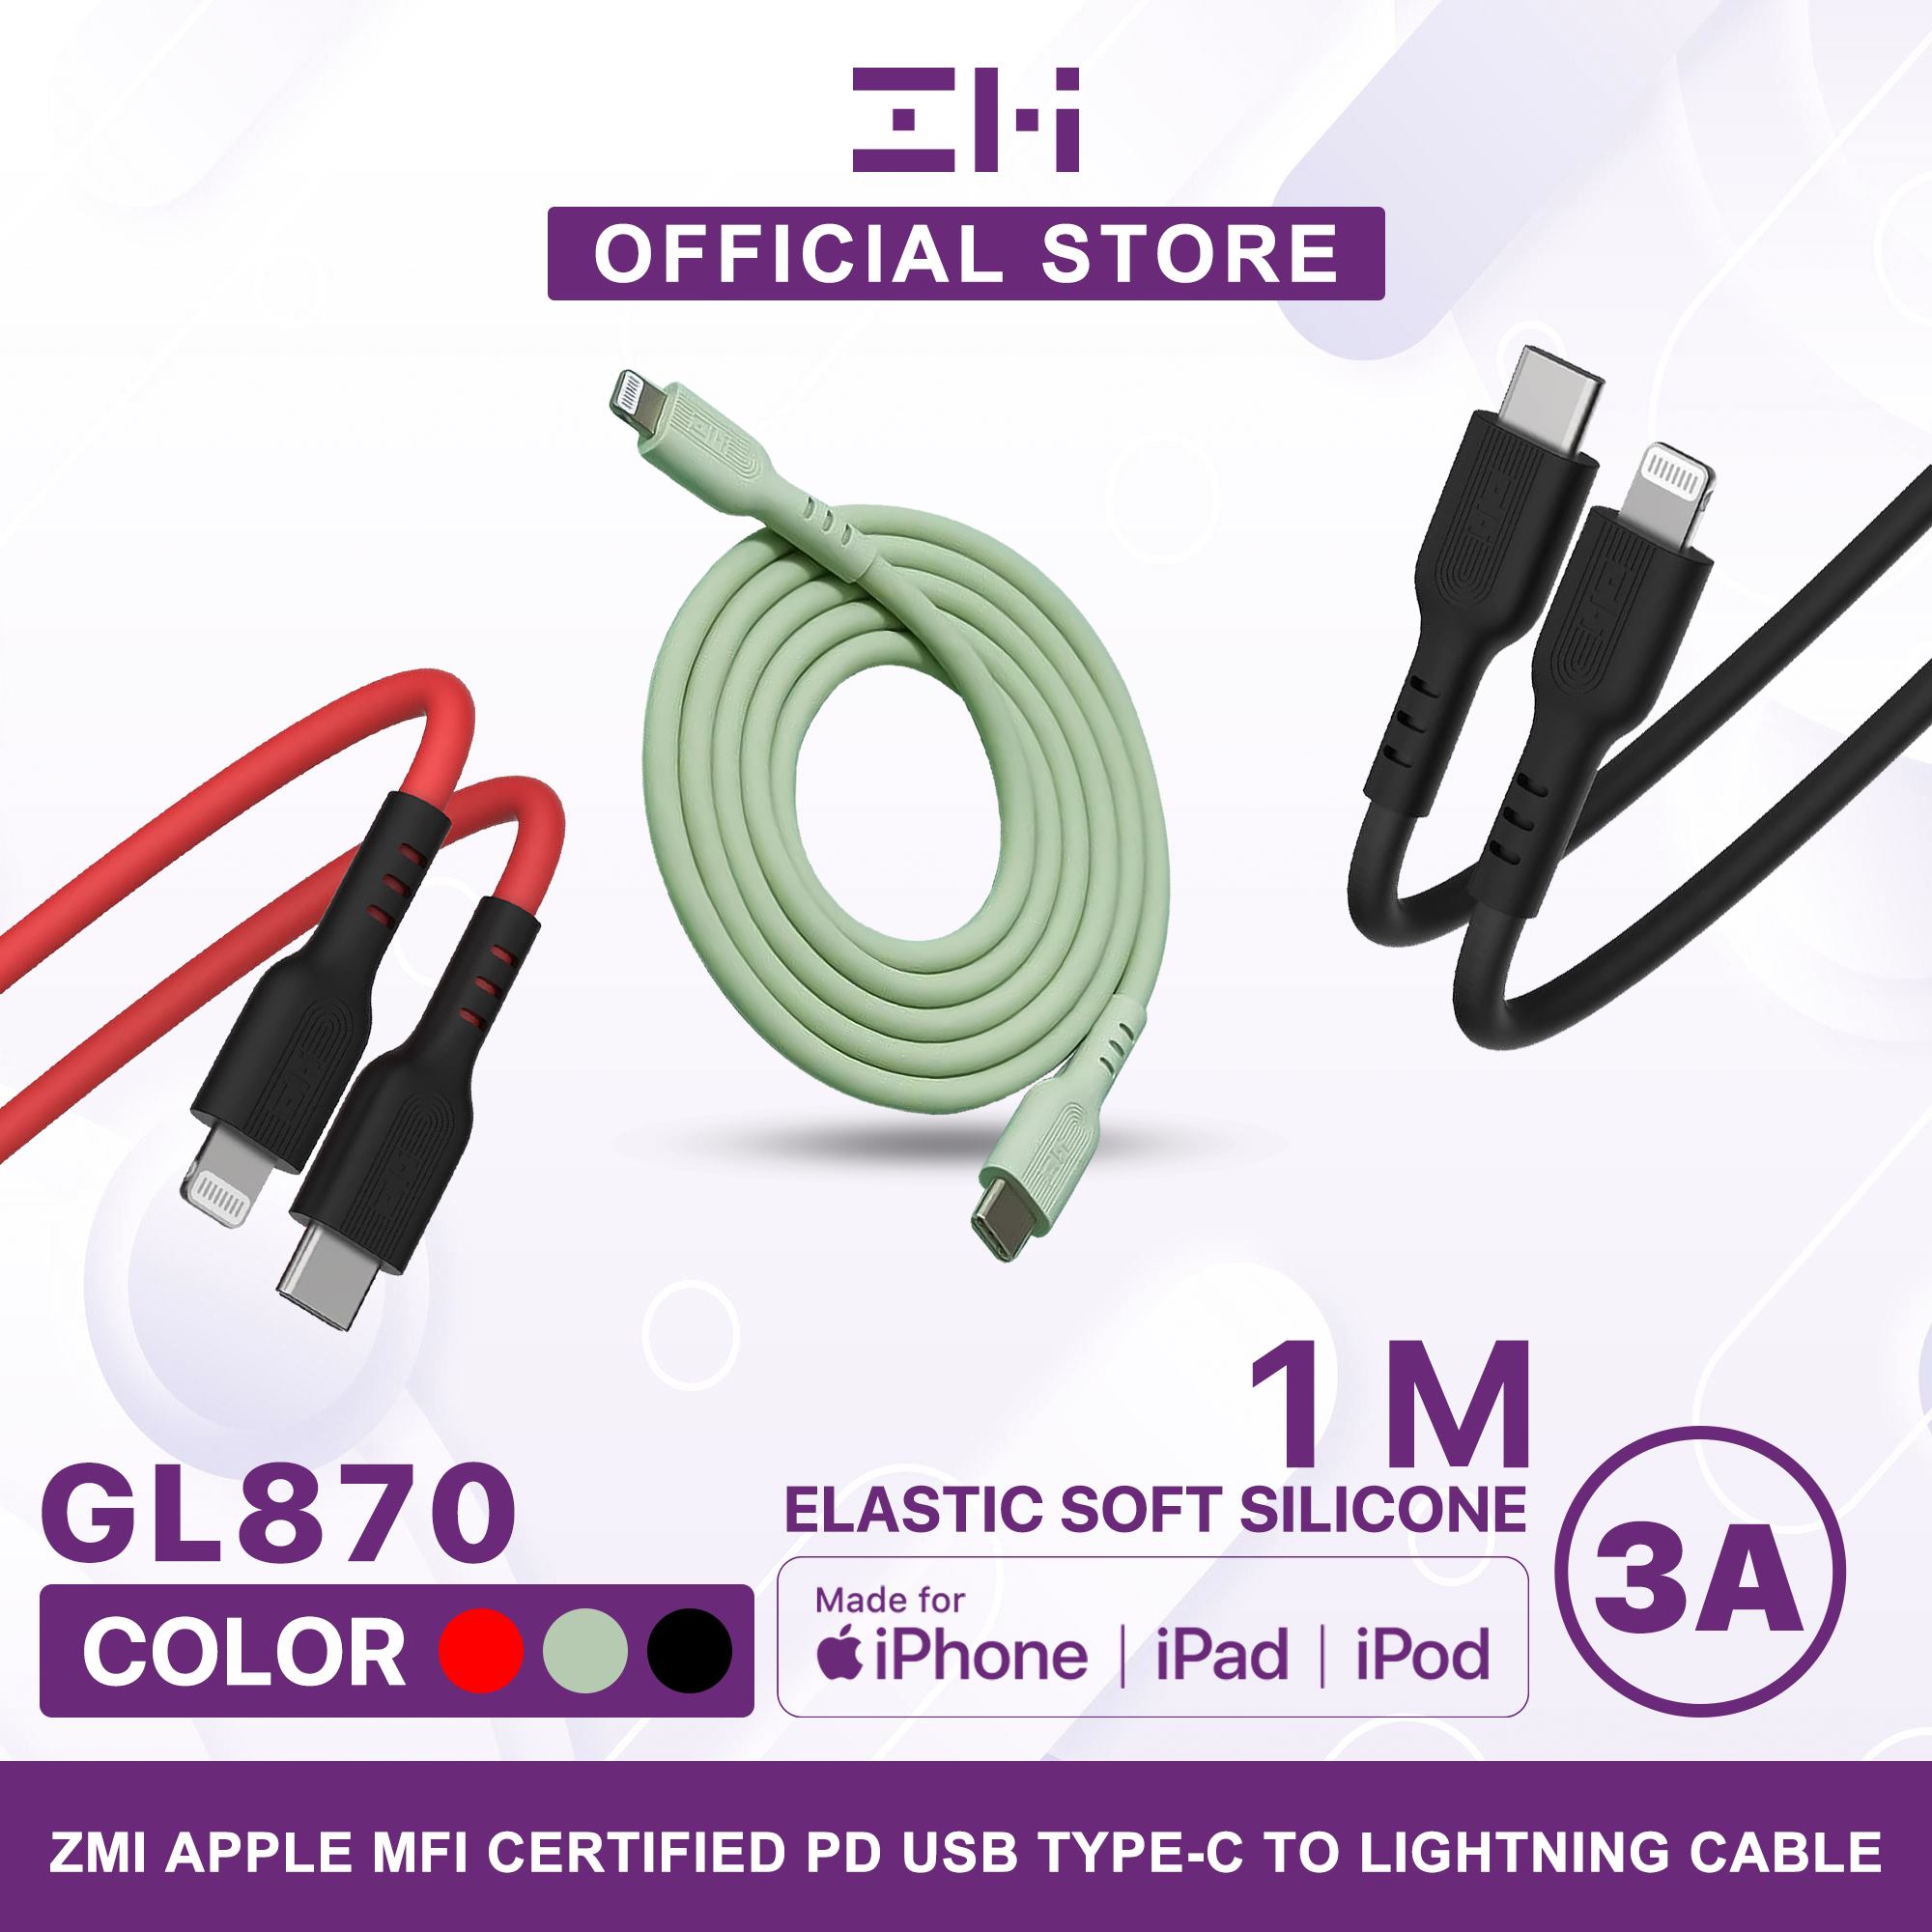 ZMI GL870 USB-C TO LIGHINING MFI CERTIFIED SILICA GEL CABLE (3A)1M, ZMI C to Lightning liquid silicone data cable, PD20W fast charge for iPhone13/12/11Pro/Xs/XR mobile phone charger flash charging line GL870, MFi Cable, Lighting Cable - BLACK